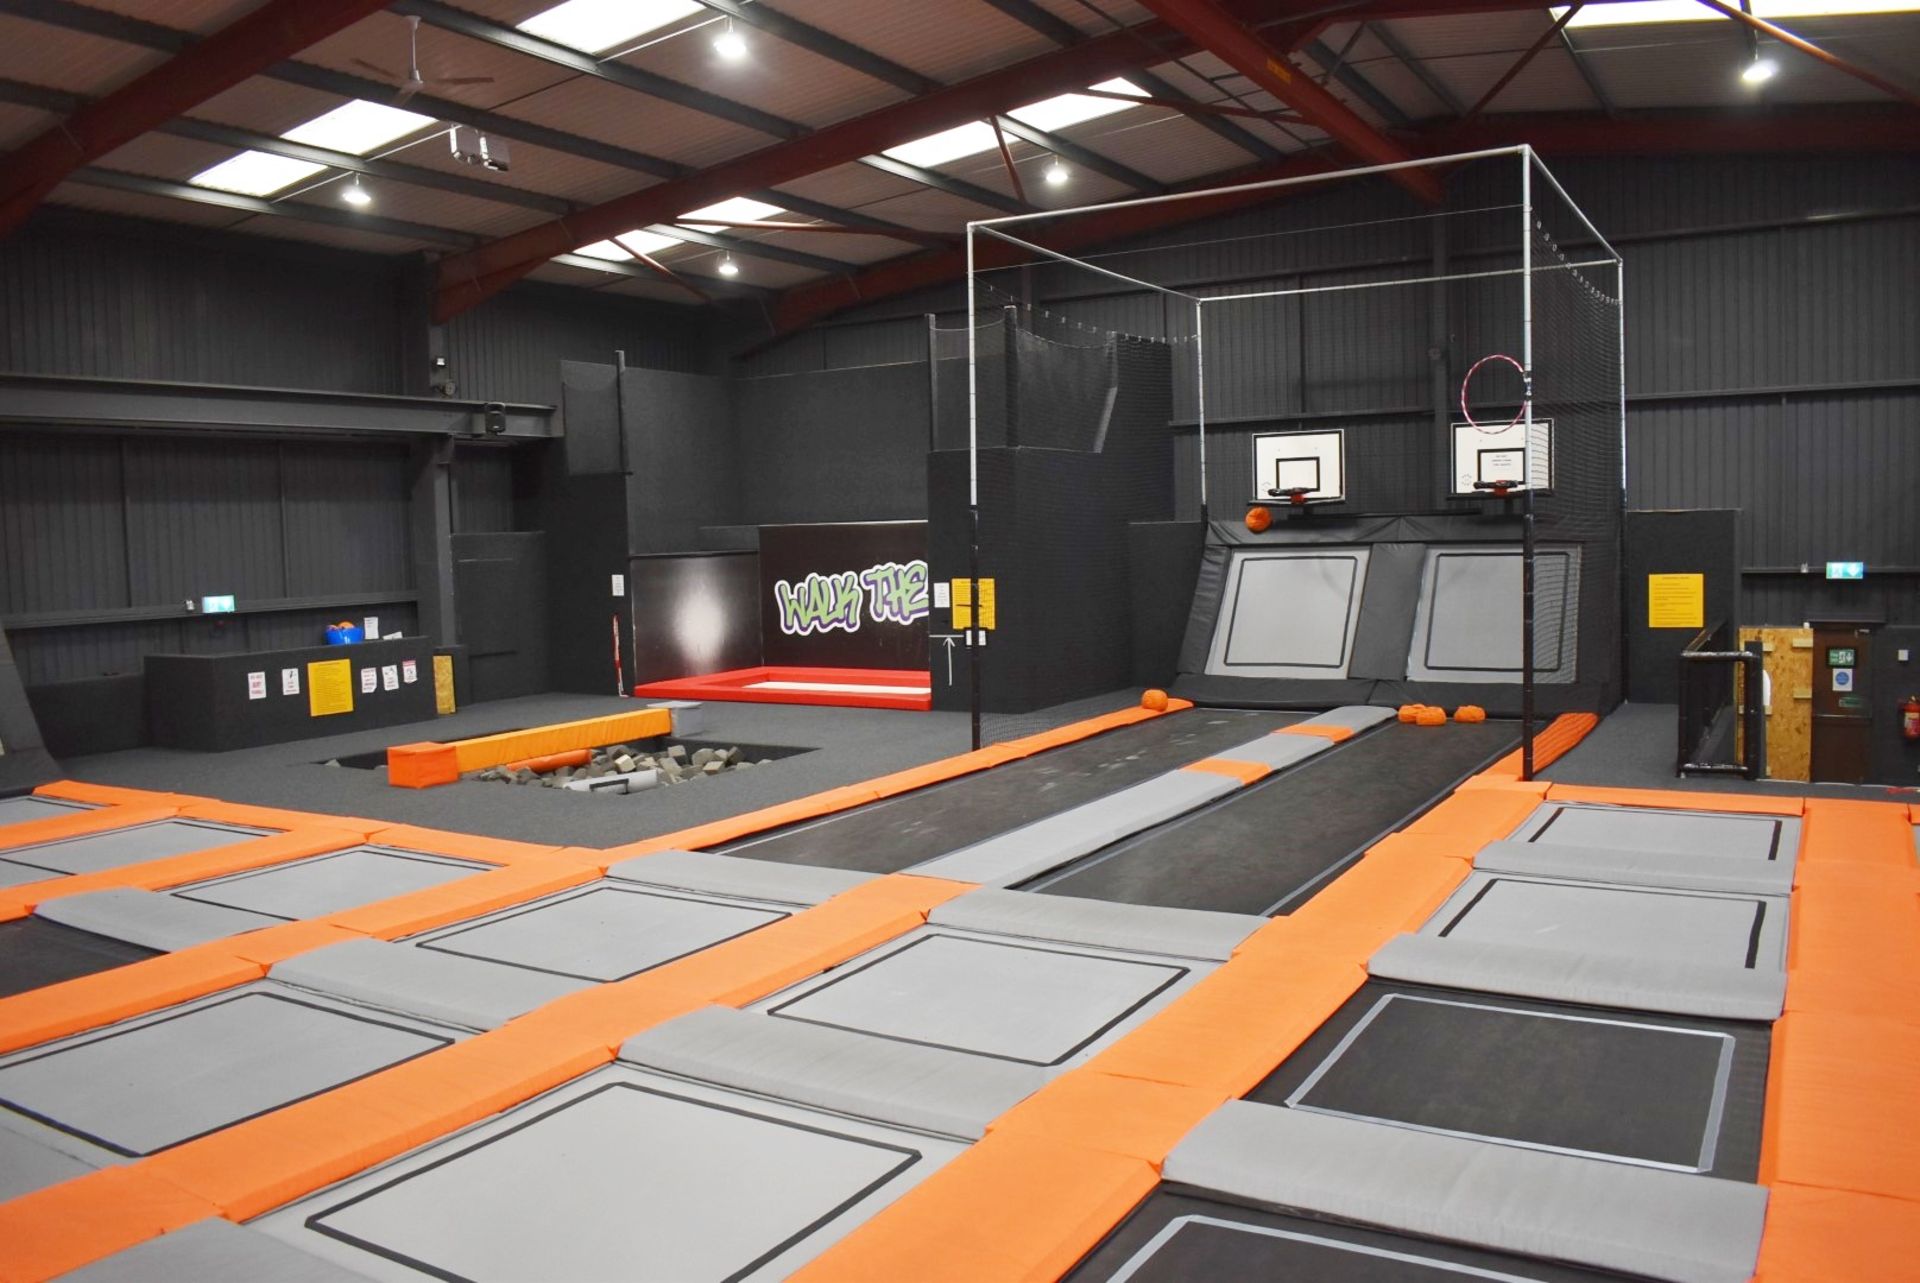 1 x Large Trampoline Park - Disassembled - Includes Dodgeball Arena And Jump Tower - CL766  - - Image 65 of 99